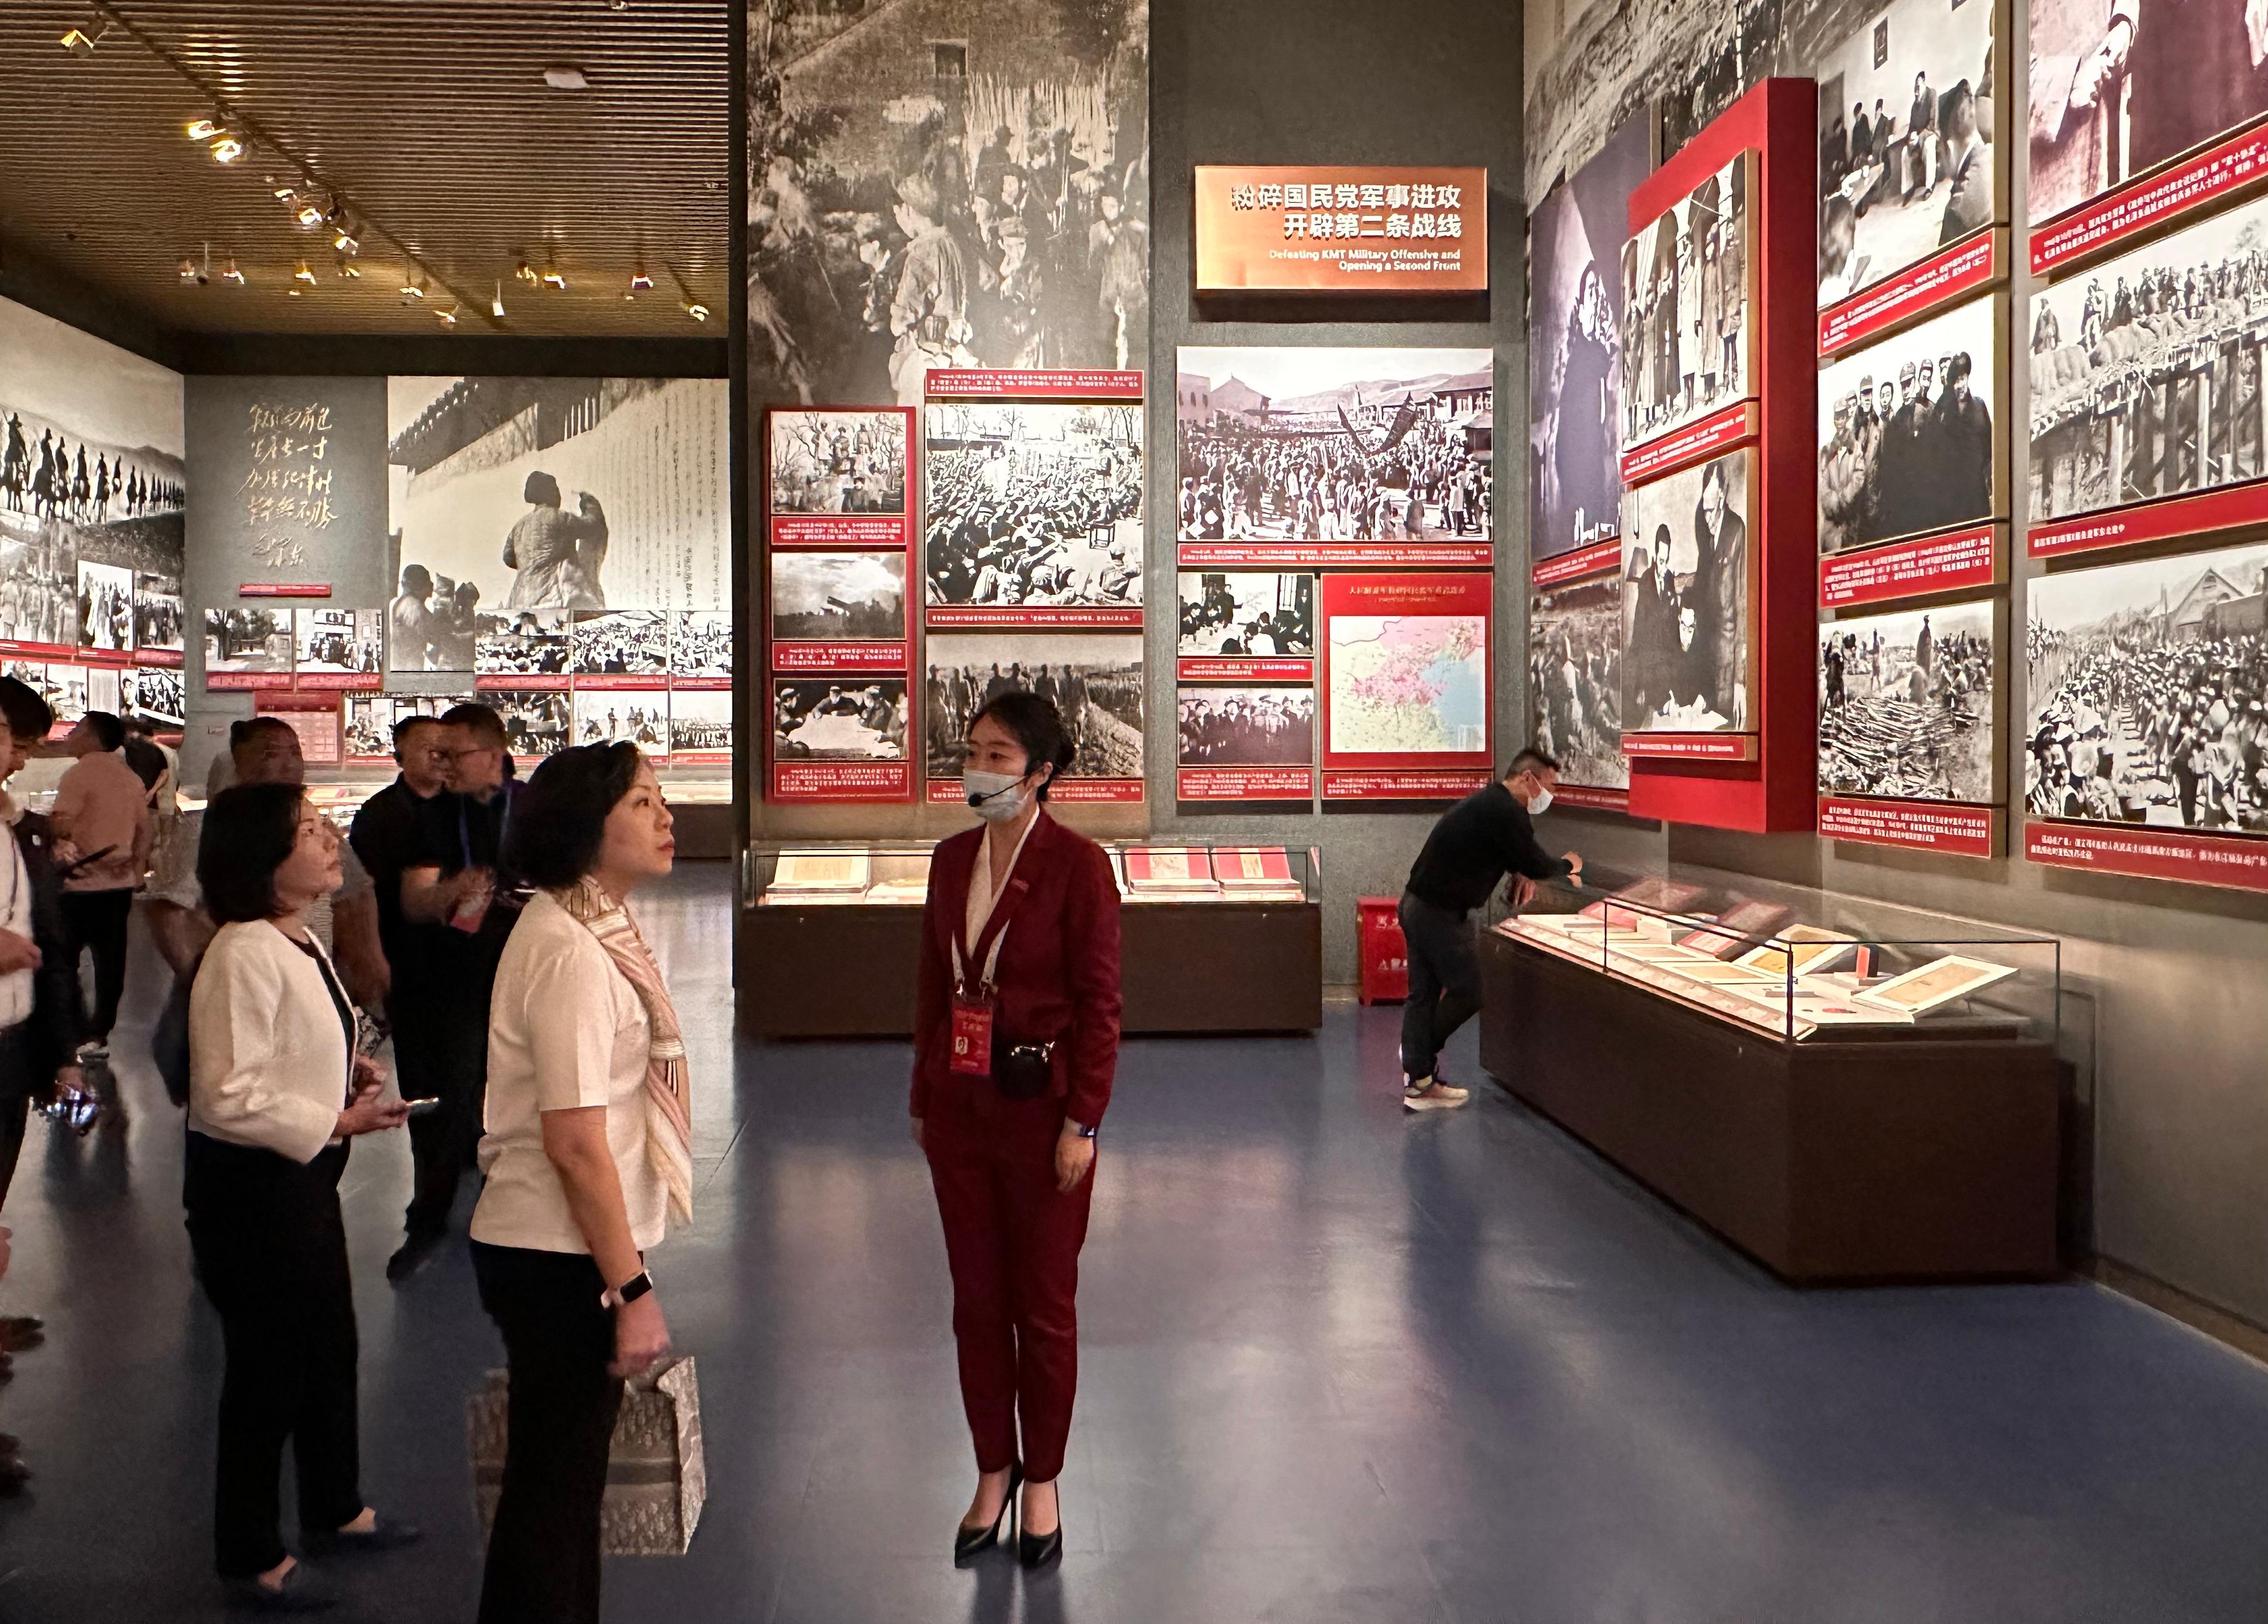 The delegation of the District Officers of the Hong Kong Special Administrative Region Government led by the Secretary for Home and Youth Affairs, Miss Alice Mak, continued its study programme in Beijing on district governance today (April 18). Photo shows Miss Mak (centre) and the delegation visiting the Museum of the Communist Party of China to obtain a deeper understanding of the 100-year history of the Communist Party of China.